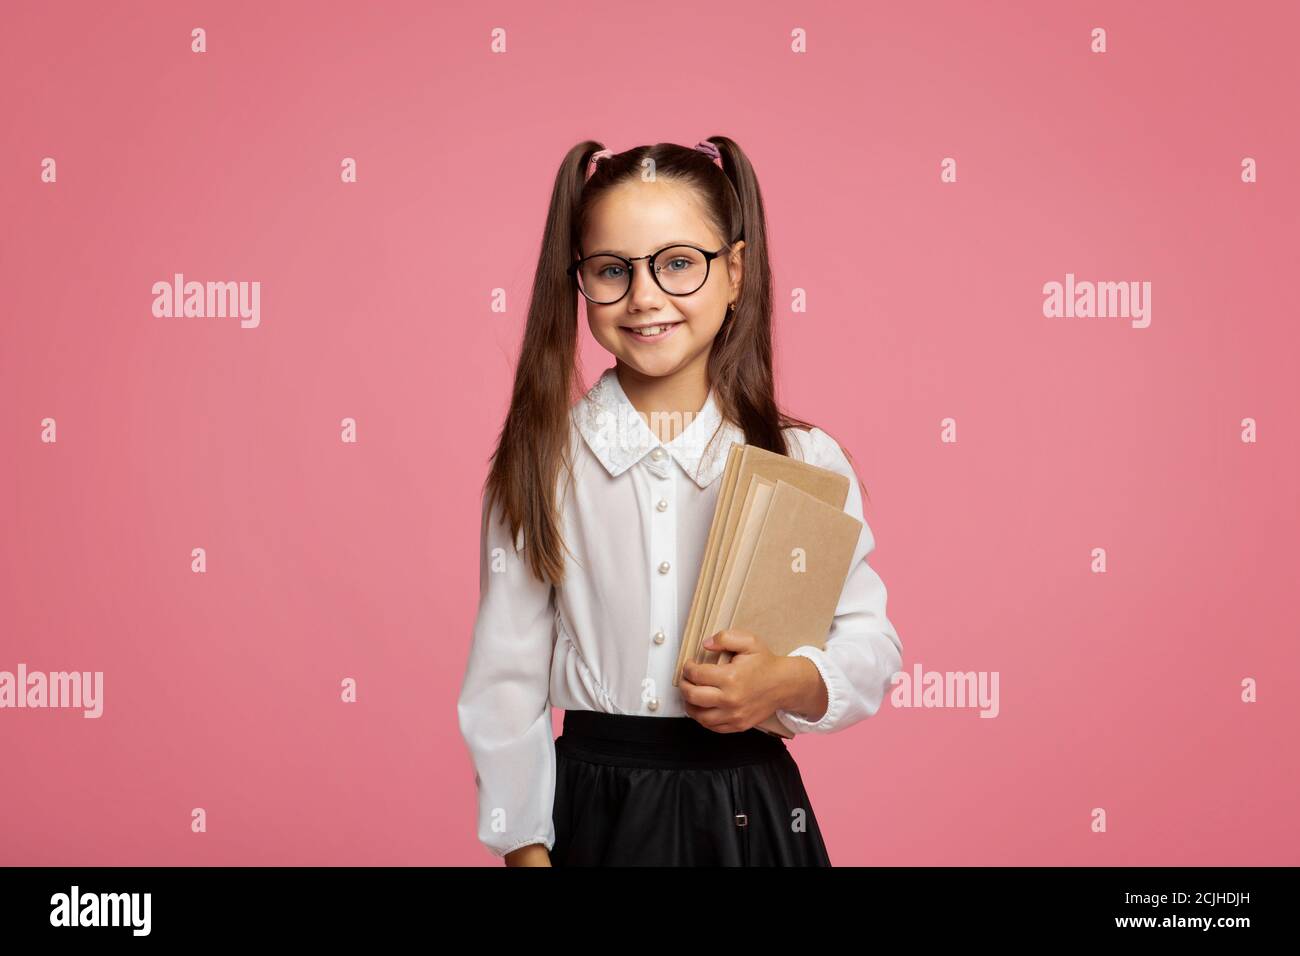 School and education. Smiling pupil in uniform and glasses holding books Stock Photo